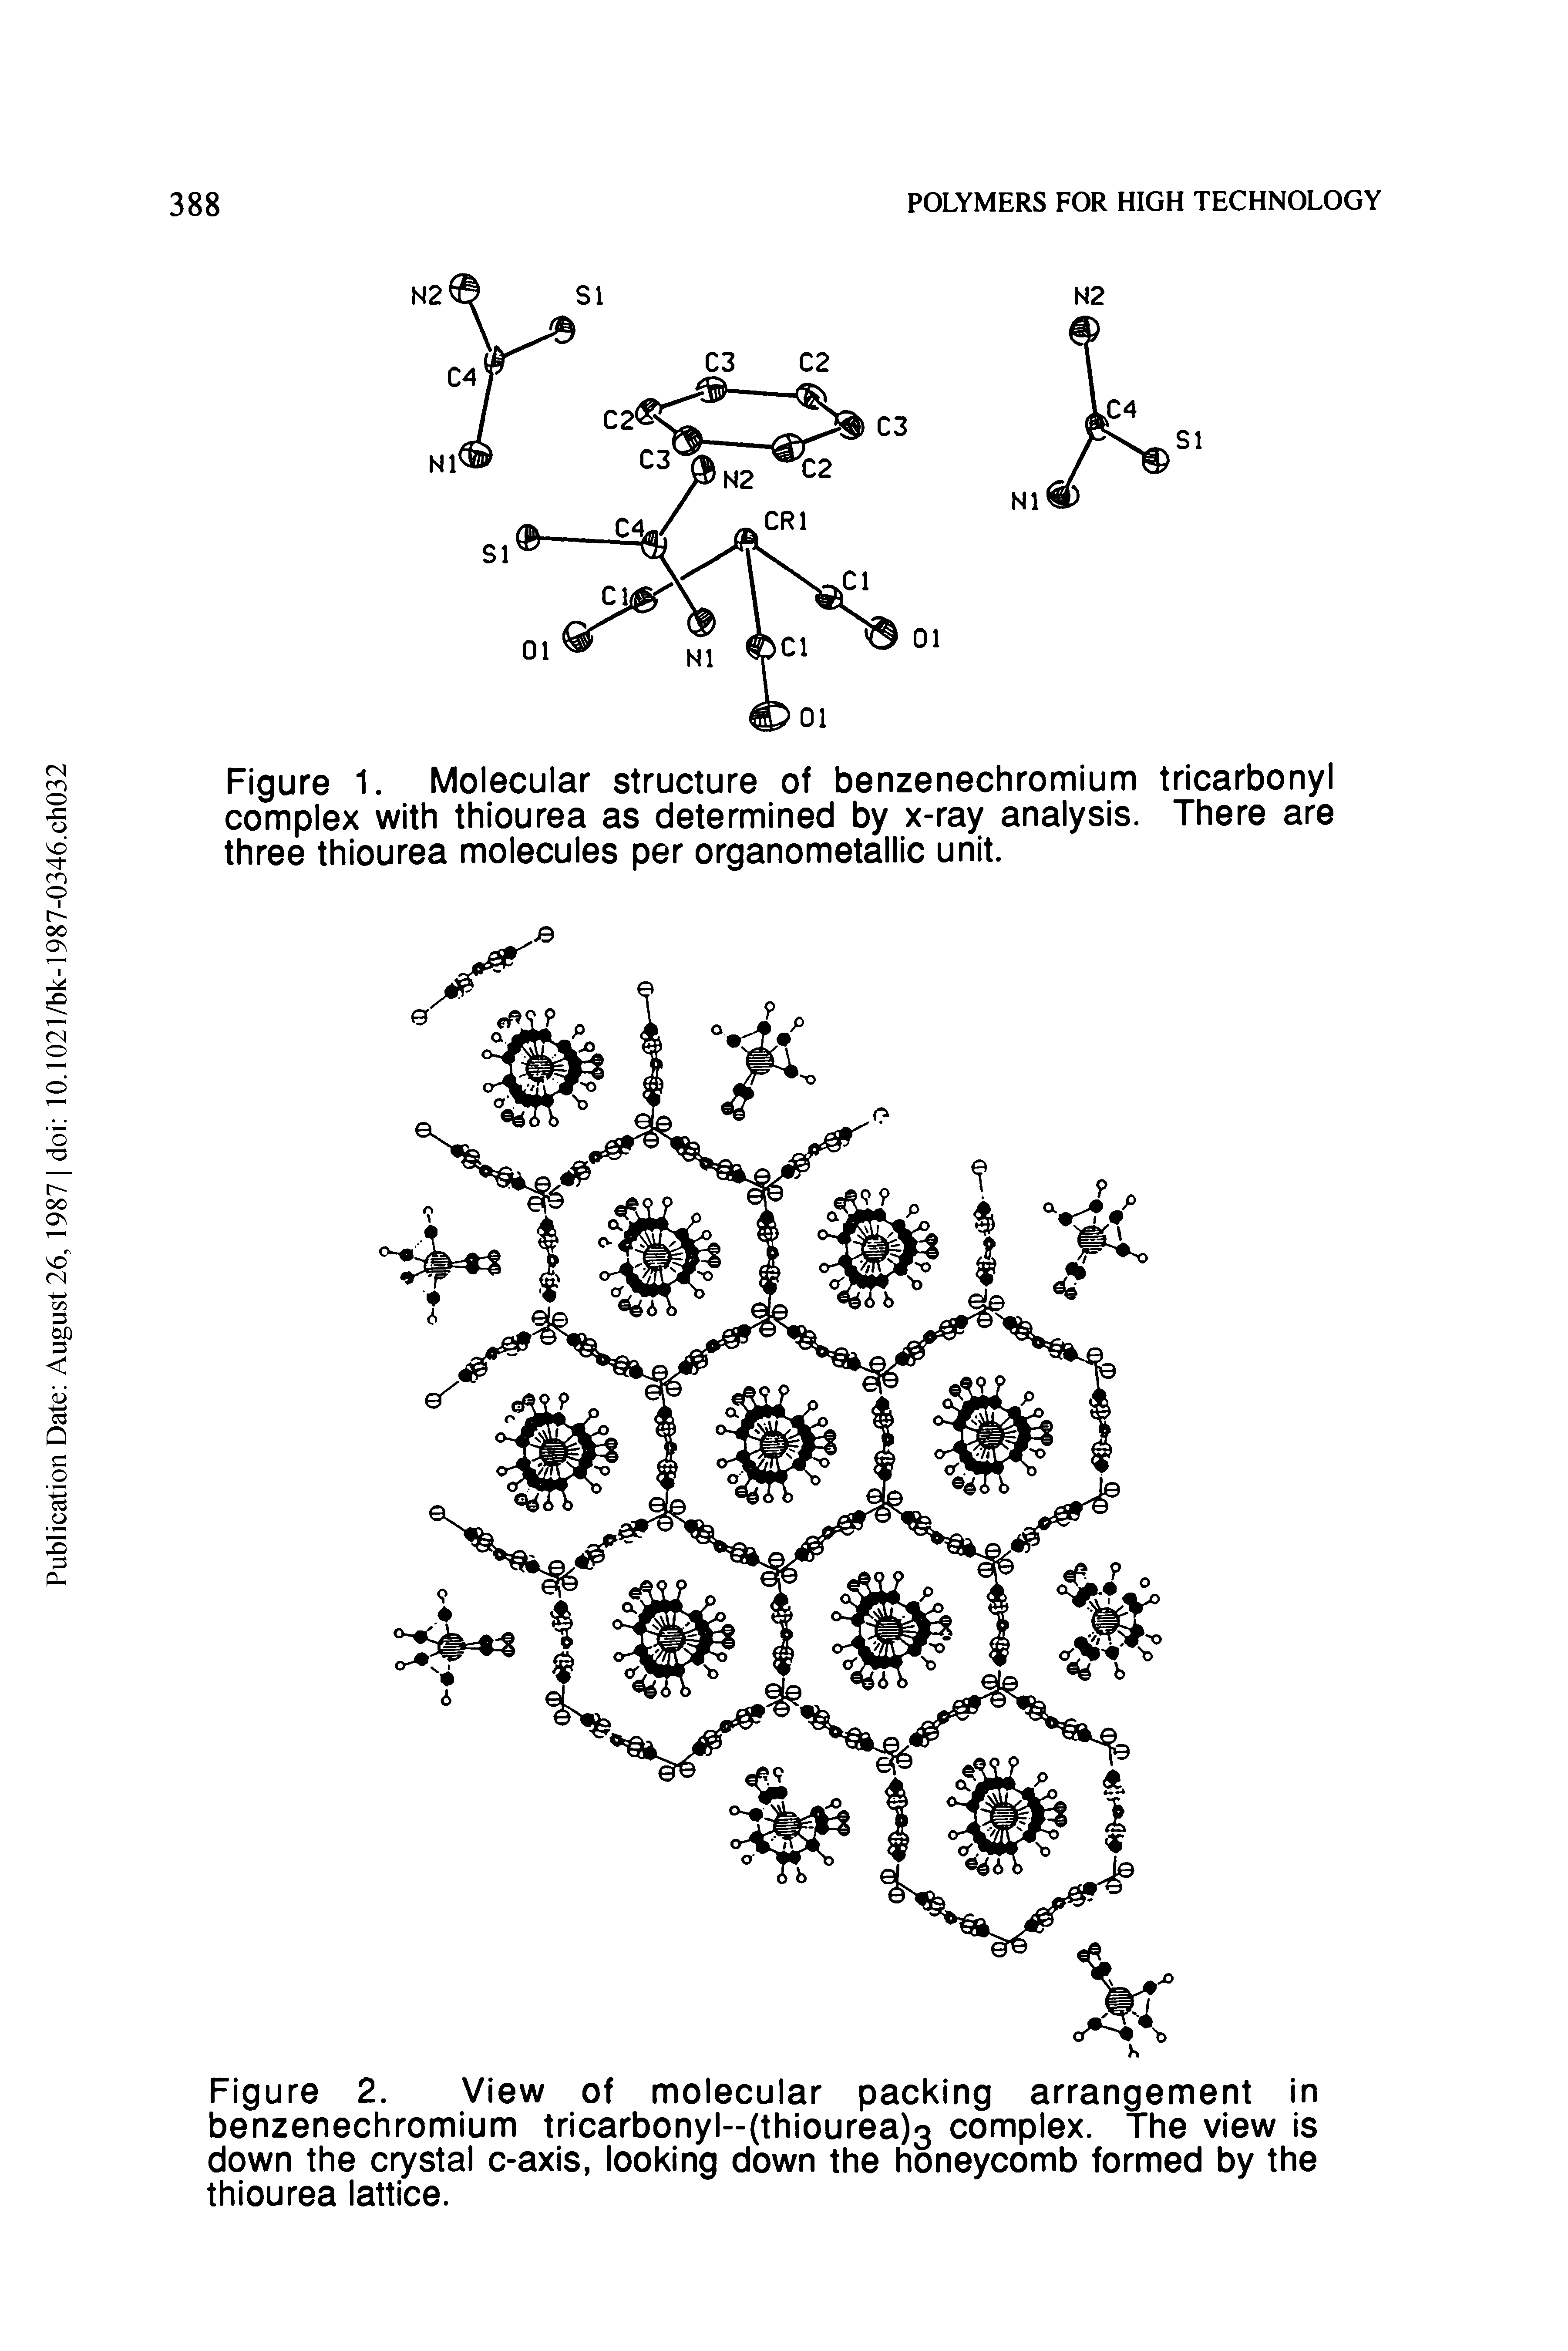 Figure 2. View of molecular packing arrangement in benzenechromium tricarbonyl-(thiourea)3 complex. The view is down the crystal c-axis, looking down the honeycomb formed by the thiourea lattice.